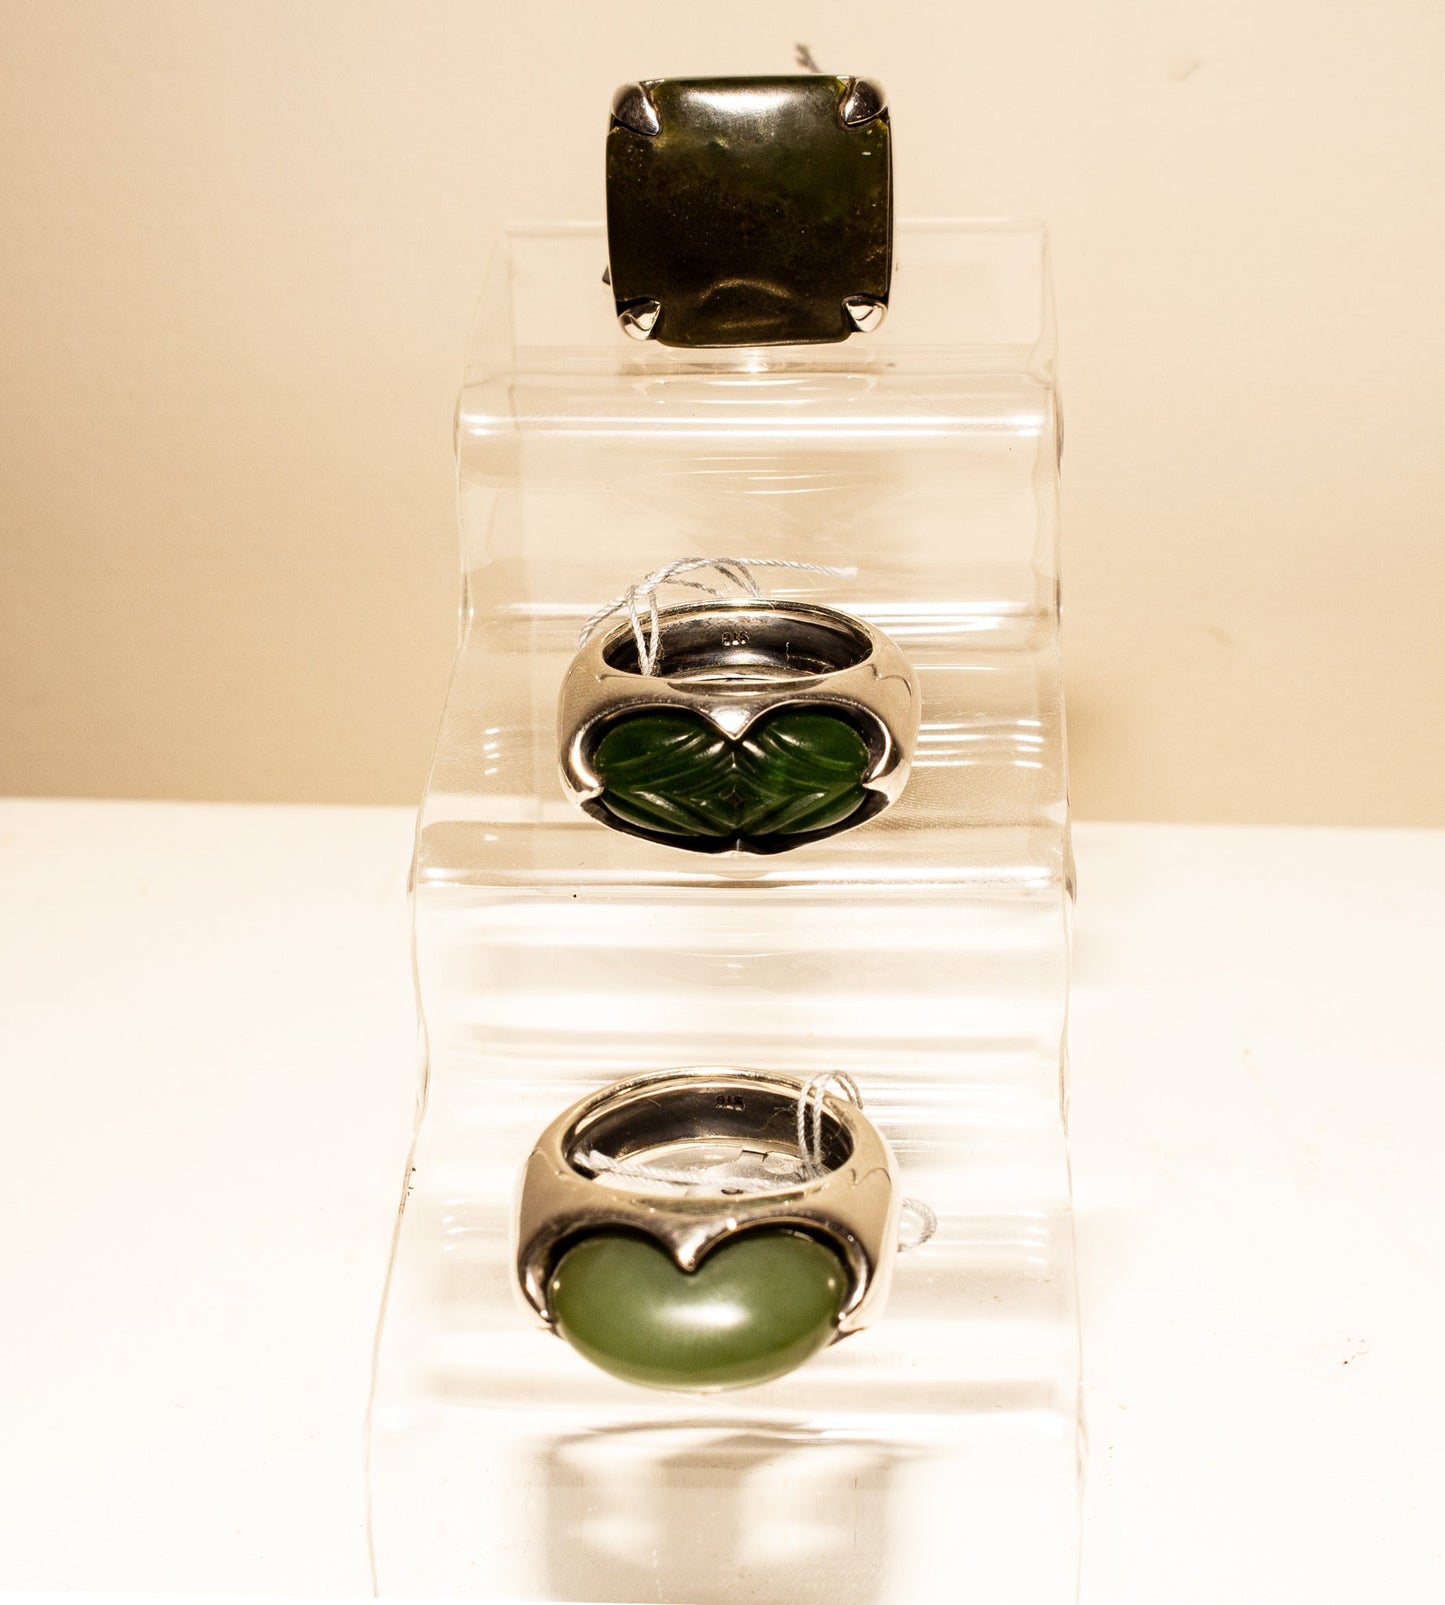 Rings – Mens
Greenstone and Sterling Silver